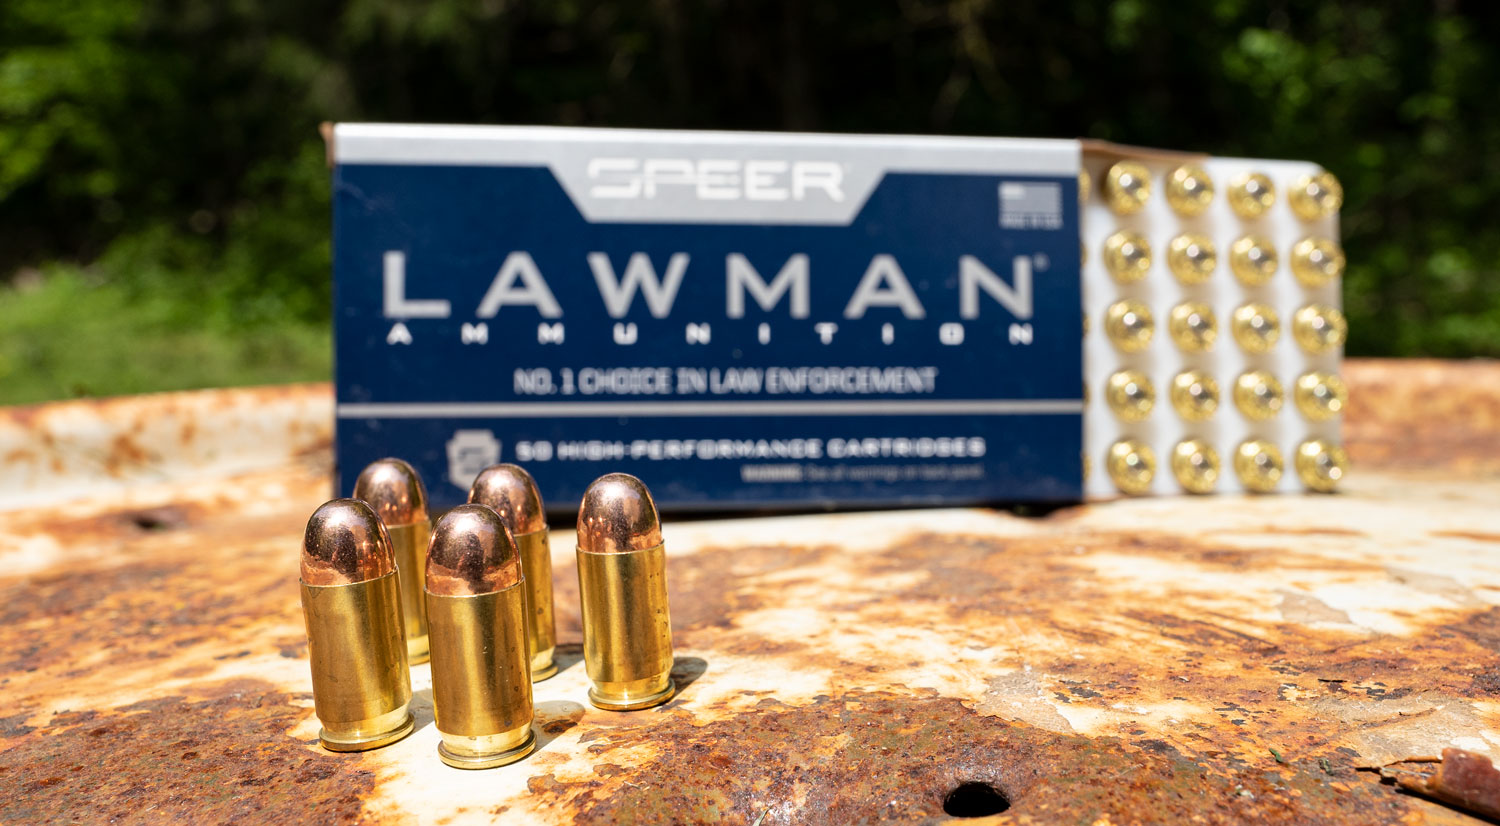 Speer lawman ammunition on a table at the shooting range